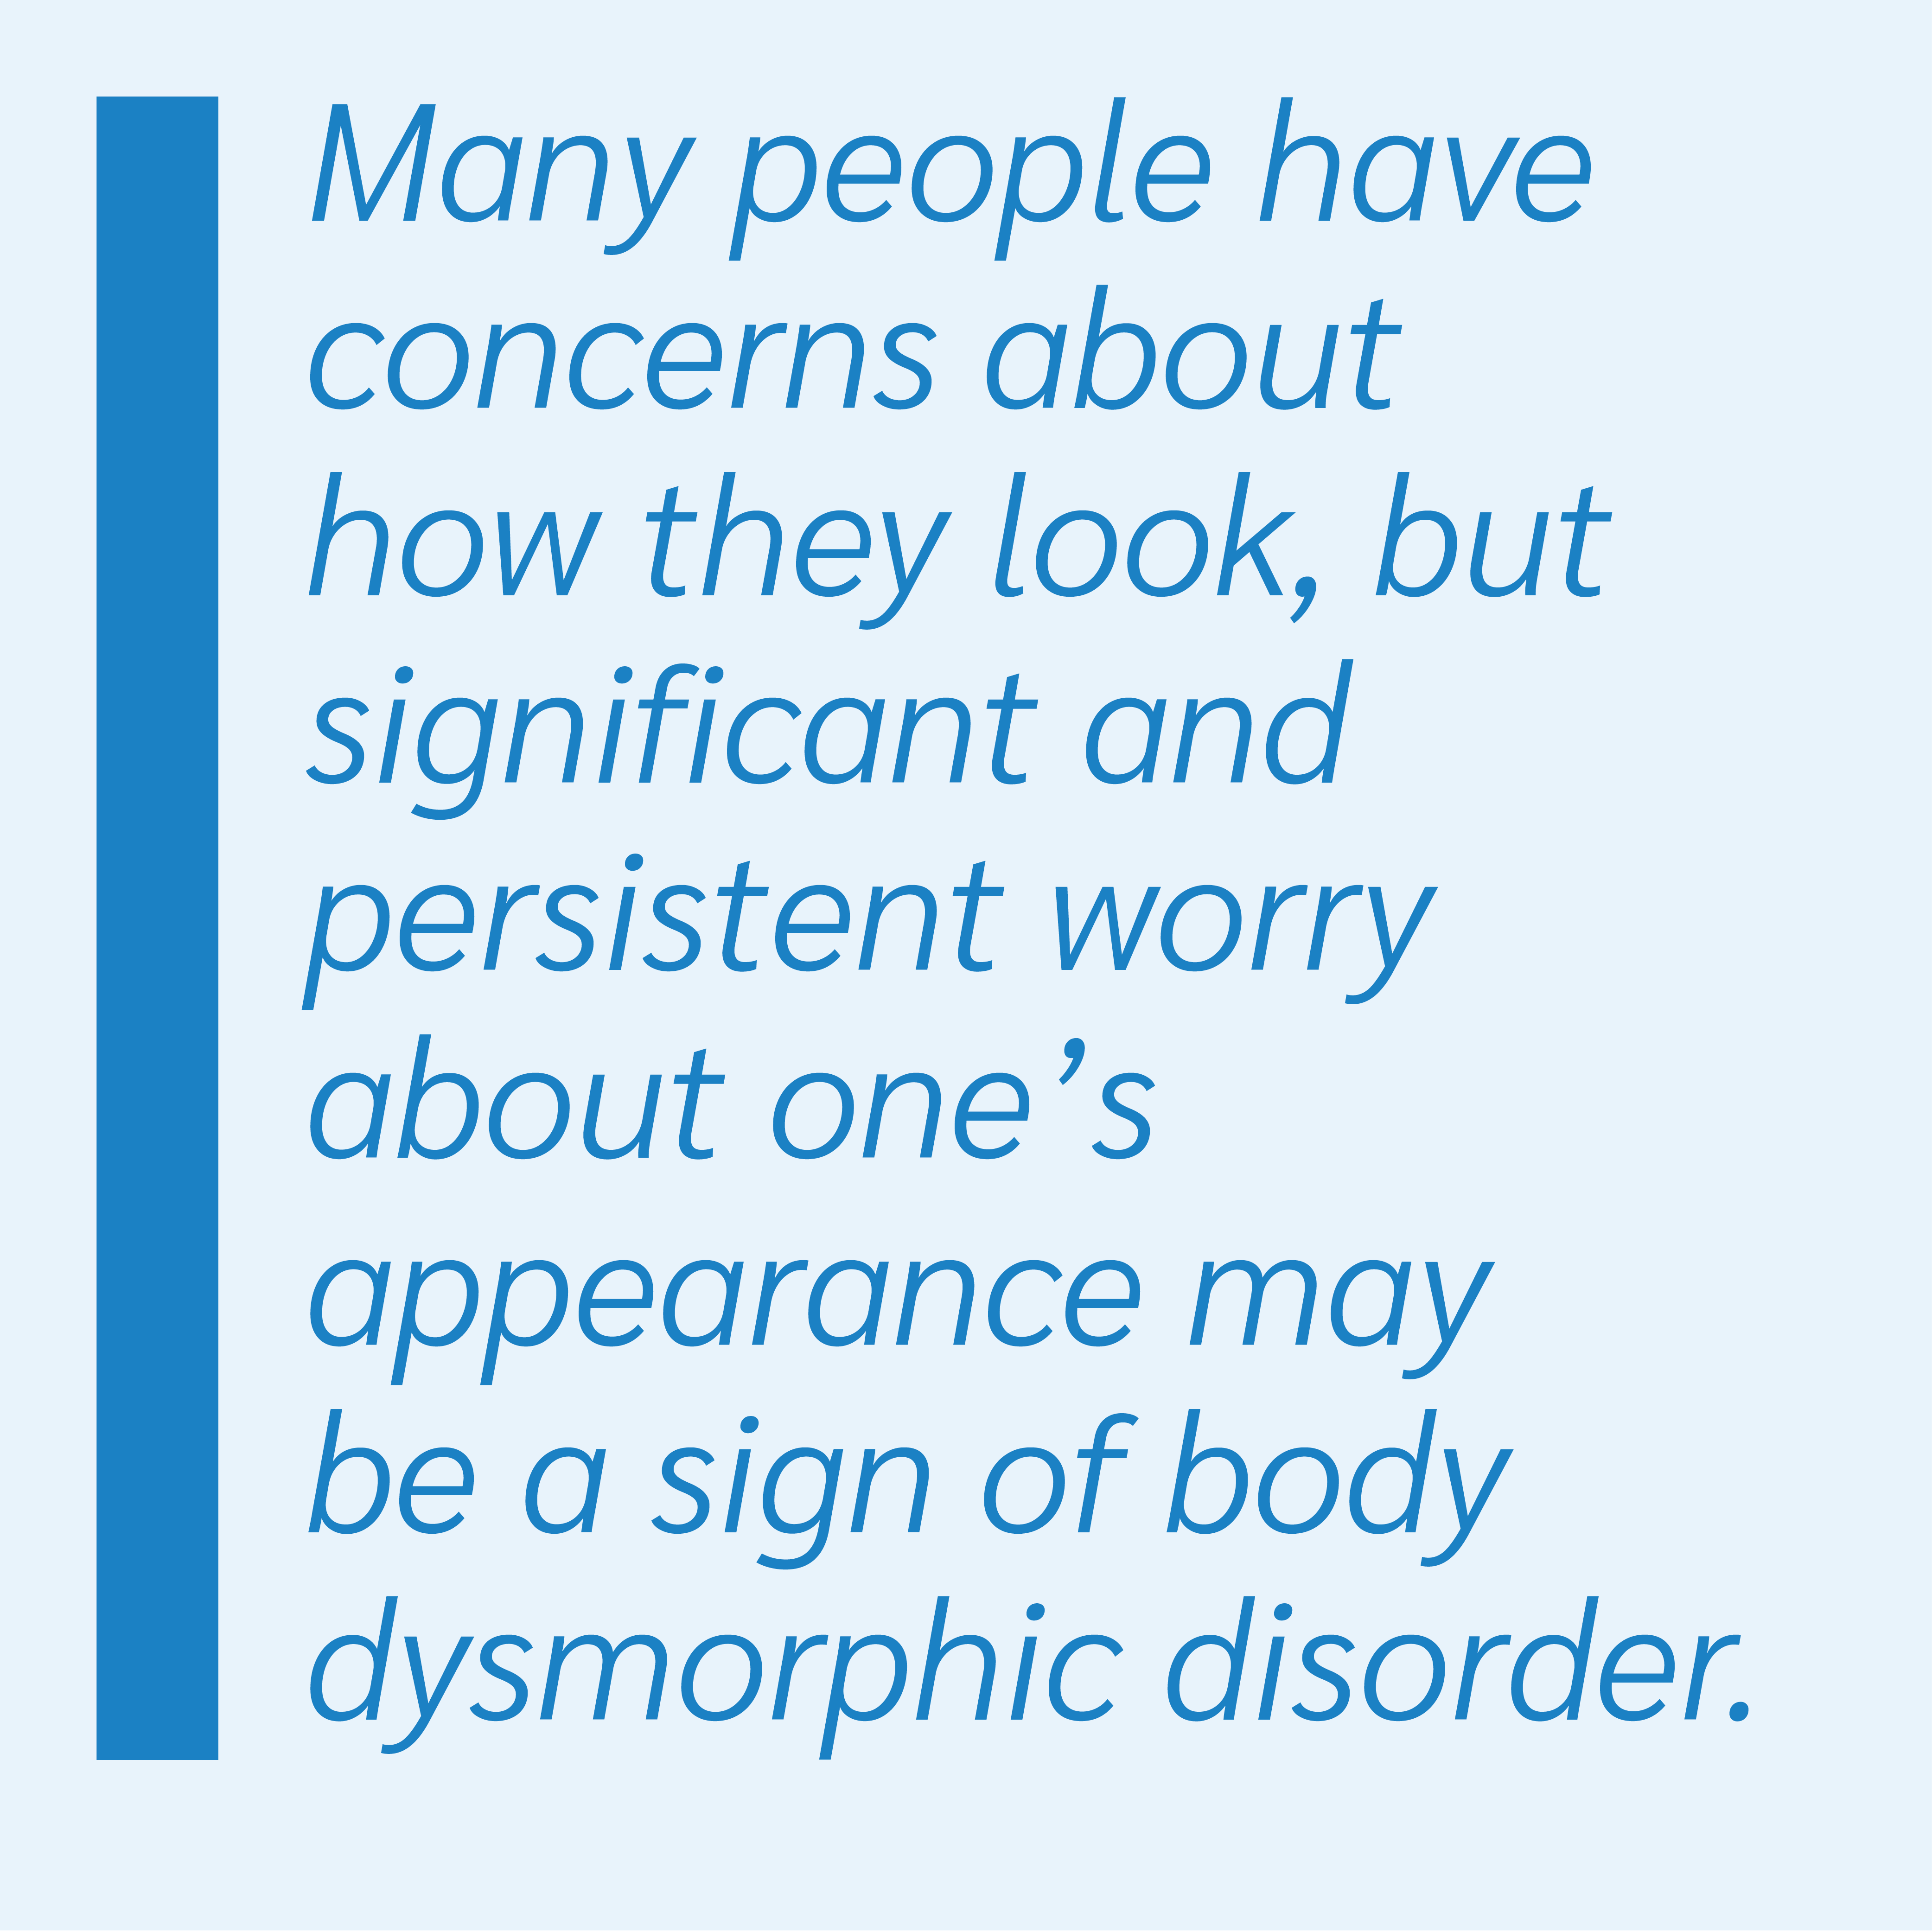 Many people have concerns about how they look, but significant and persistent worry about one’s appearance may be a sign of body dysmorphic disorder.